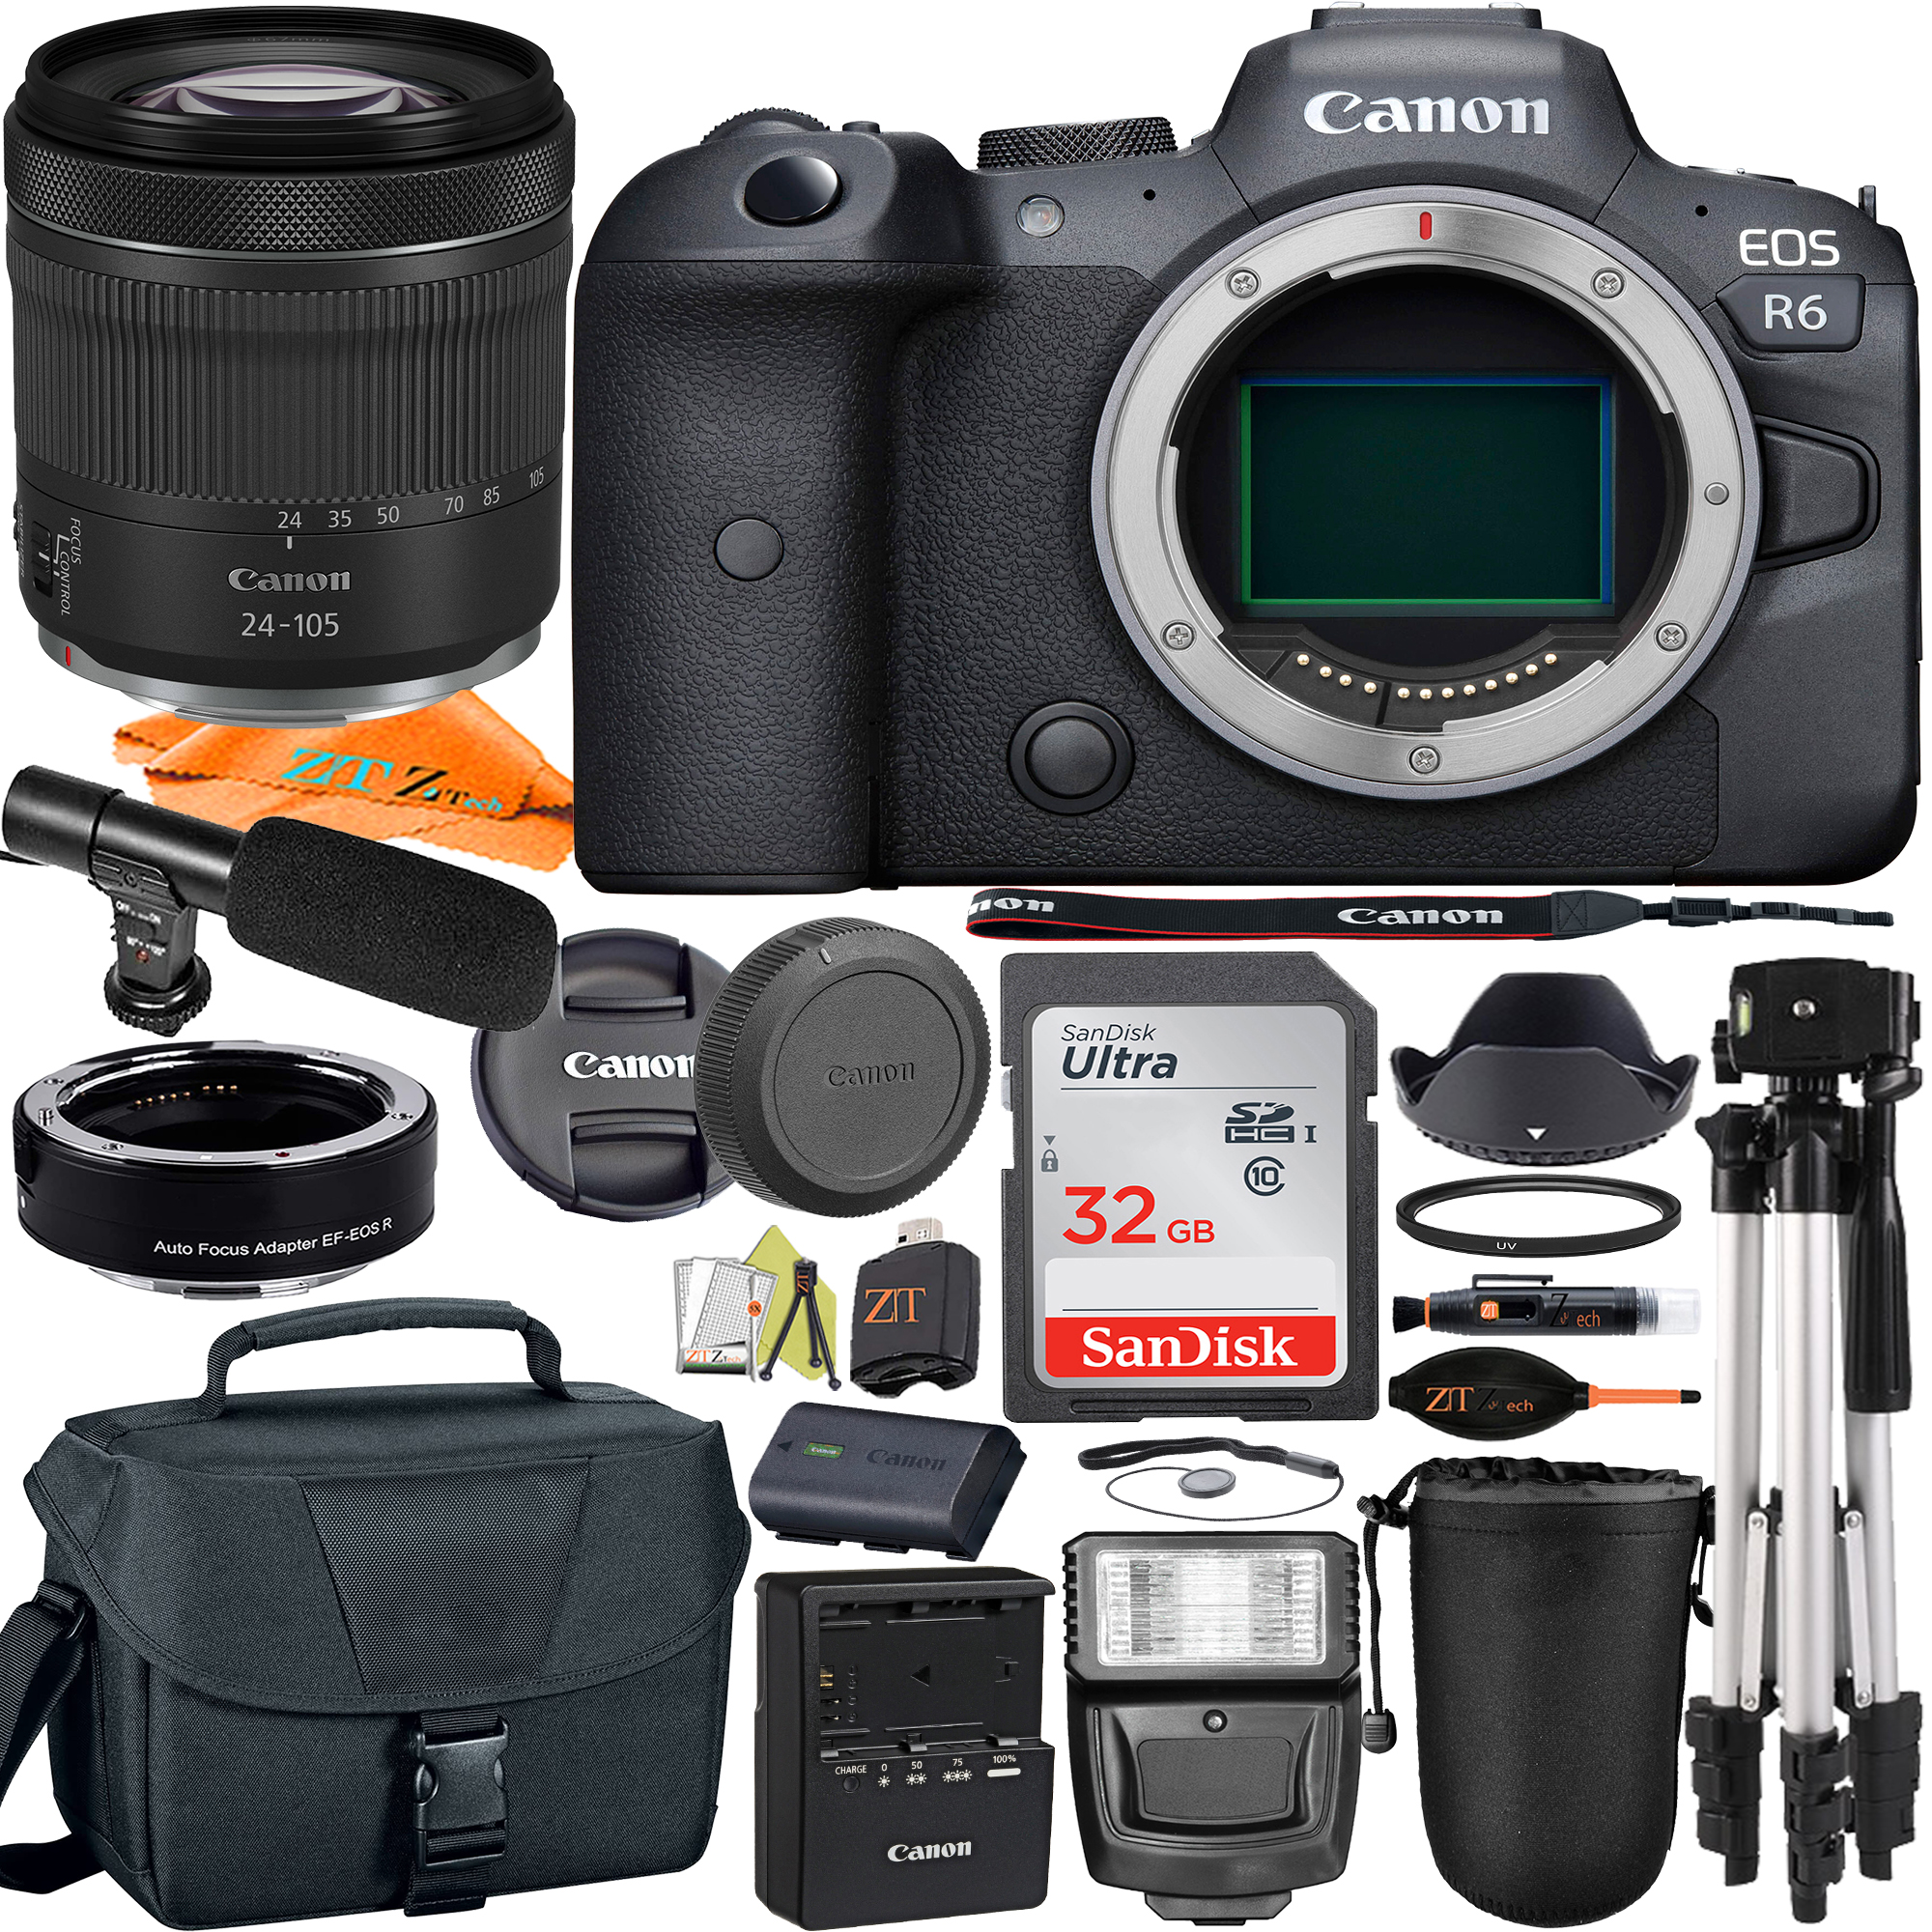 Canon EOS R6 Mirrorless Digital Camera with RF 24-105mm STM Lens + Mount Adapter + SanDisk 32GB + ZeeTech Accessory Bundle